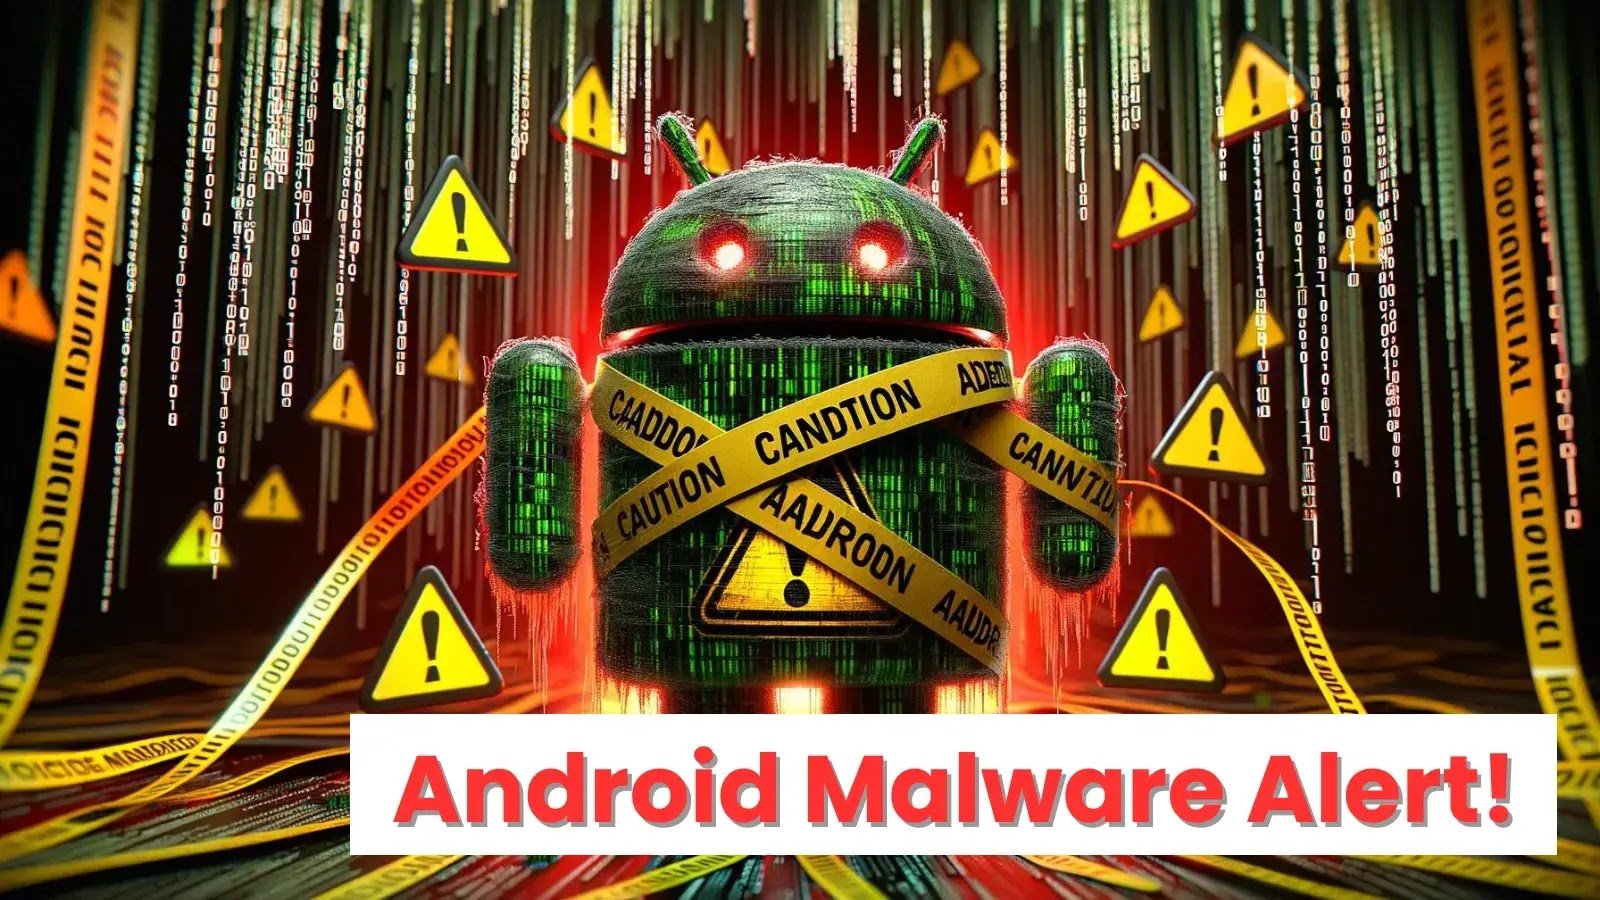 Android Malware Alert!